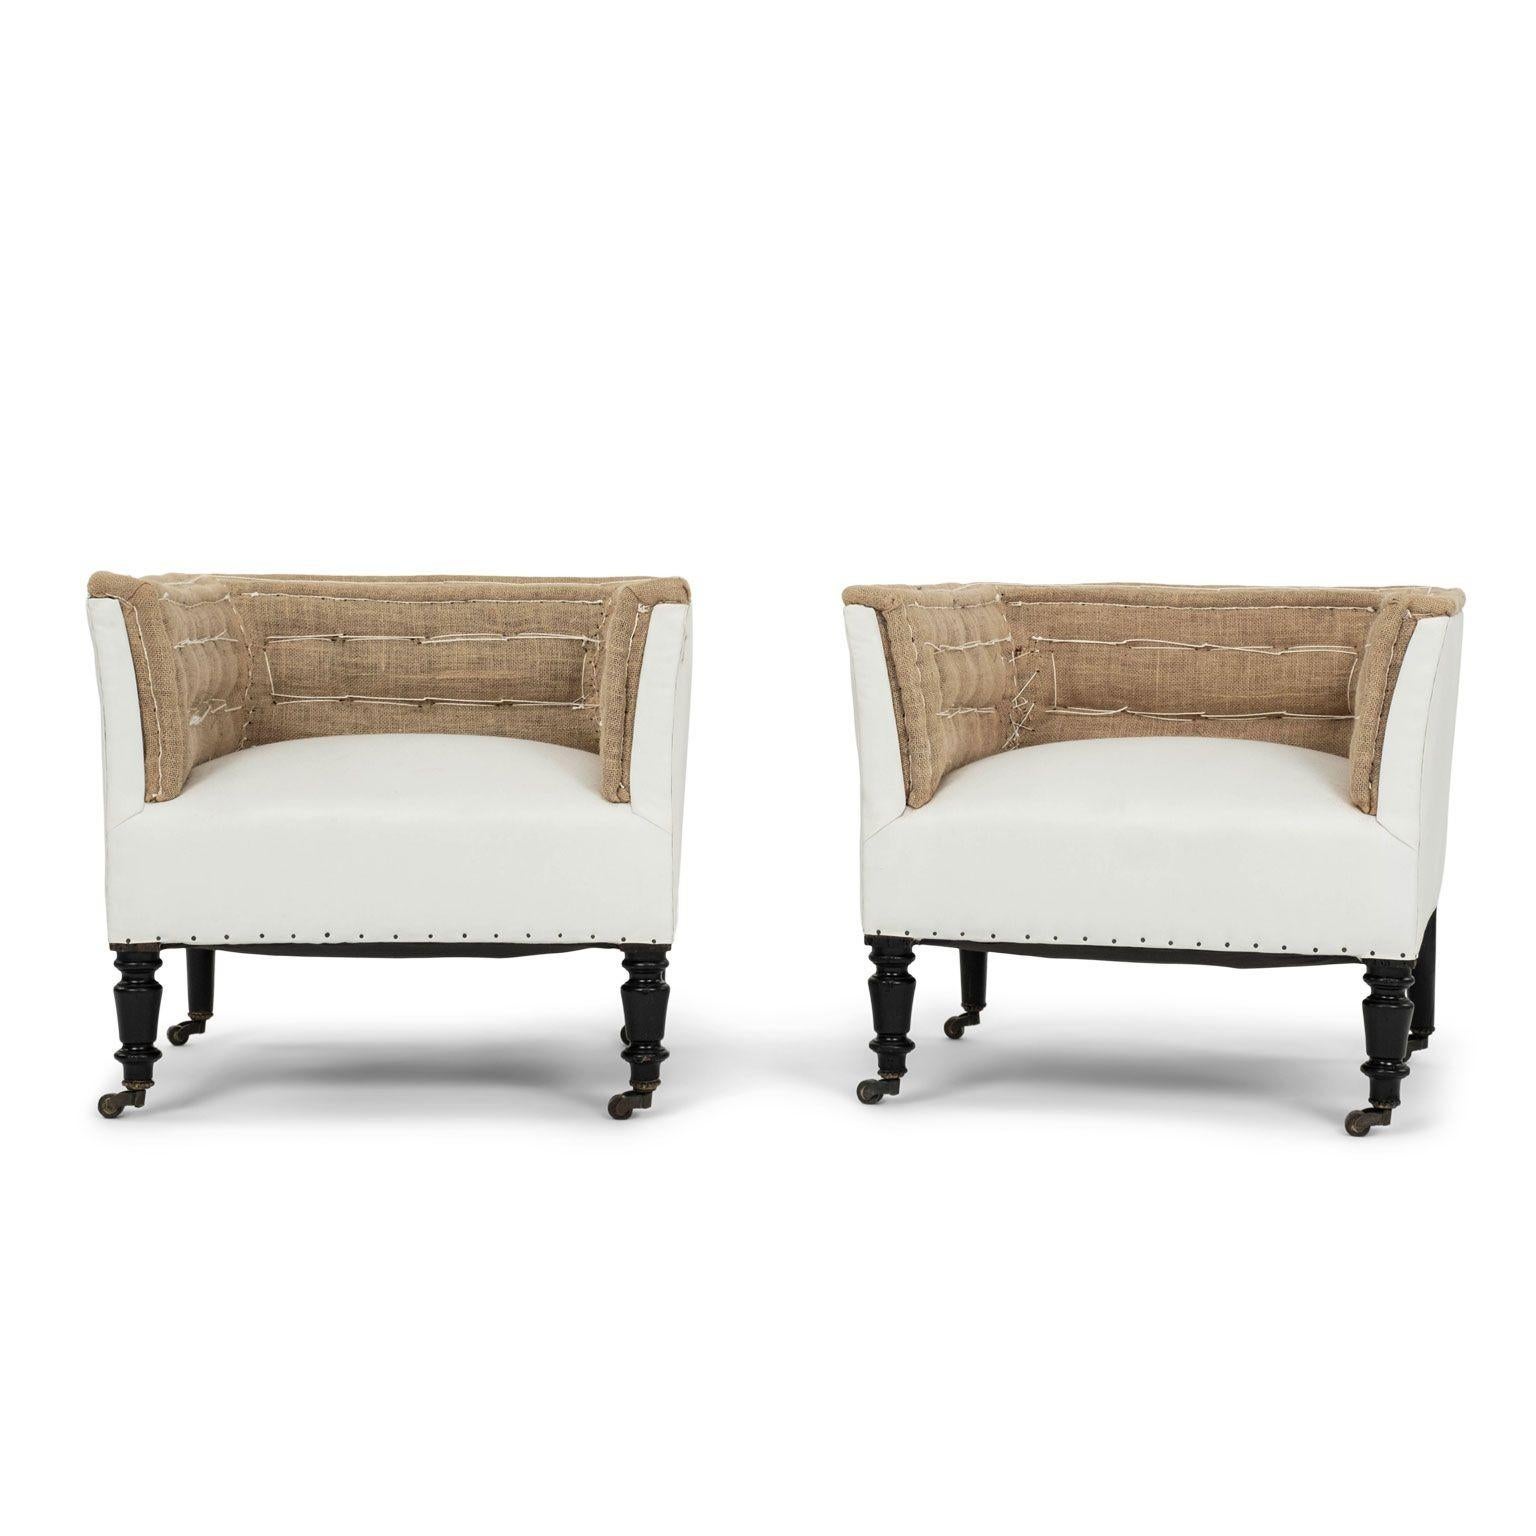 Napoleon III low squared-back chairs on casters circa 1860-1879. Turned and hand-carved ebonized legs on casters. Newly-covered in white ticking and burlap. Sold together and priced $6,800 for the pair.

Note: Original/early finish on antique and